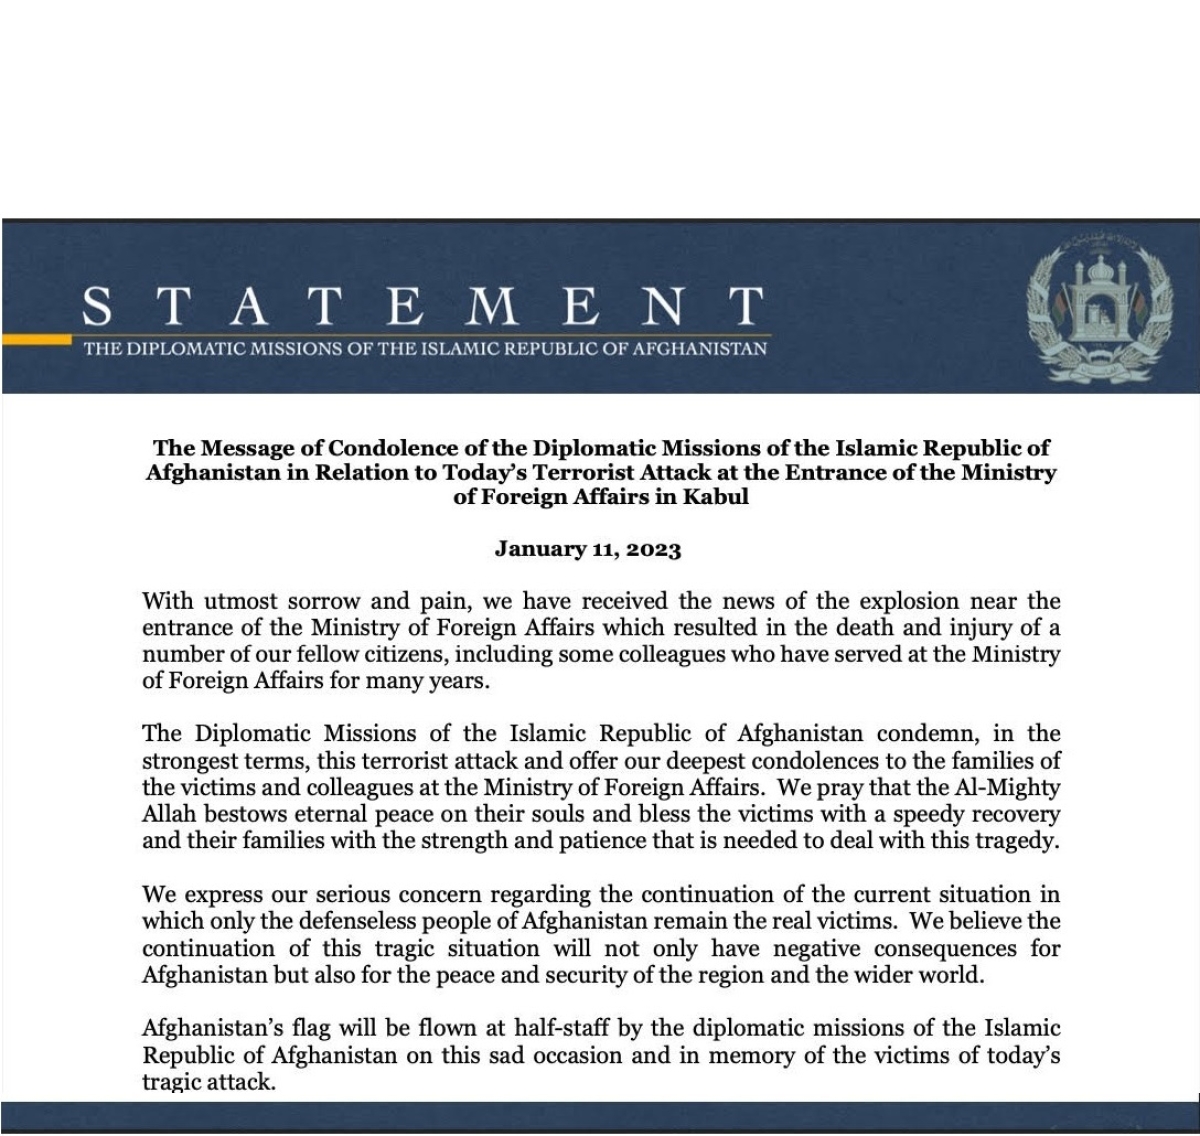 THE MESSAGE OF CONDOLENCE OF THE DIPLOMATIC MISSIONS OF THE ISLAMIC REPUBLIC OF AFGHANISTAN IN RELATION TO TODAY&#039;S TERRORIST ATTACK AT THE ENTRANCE OF THE MINISTRY OF FOREIGN AFFAIRS IN KABUL